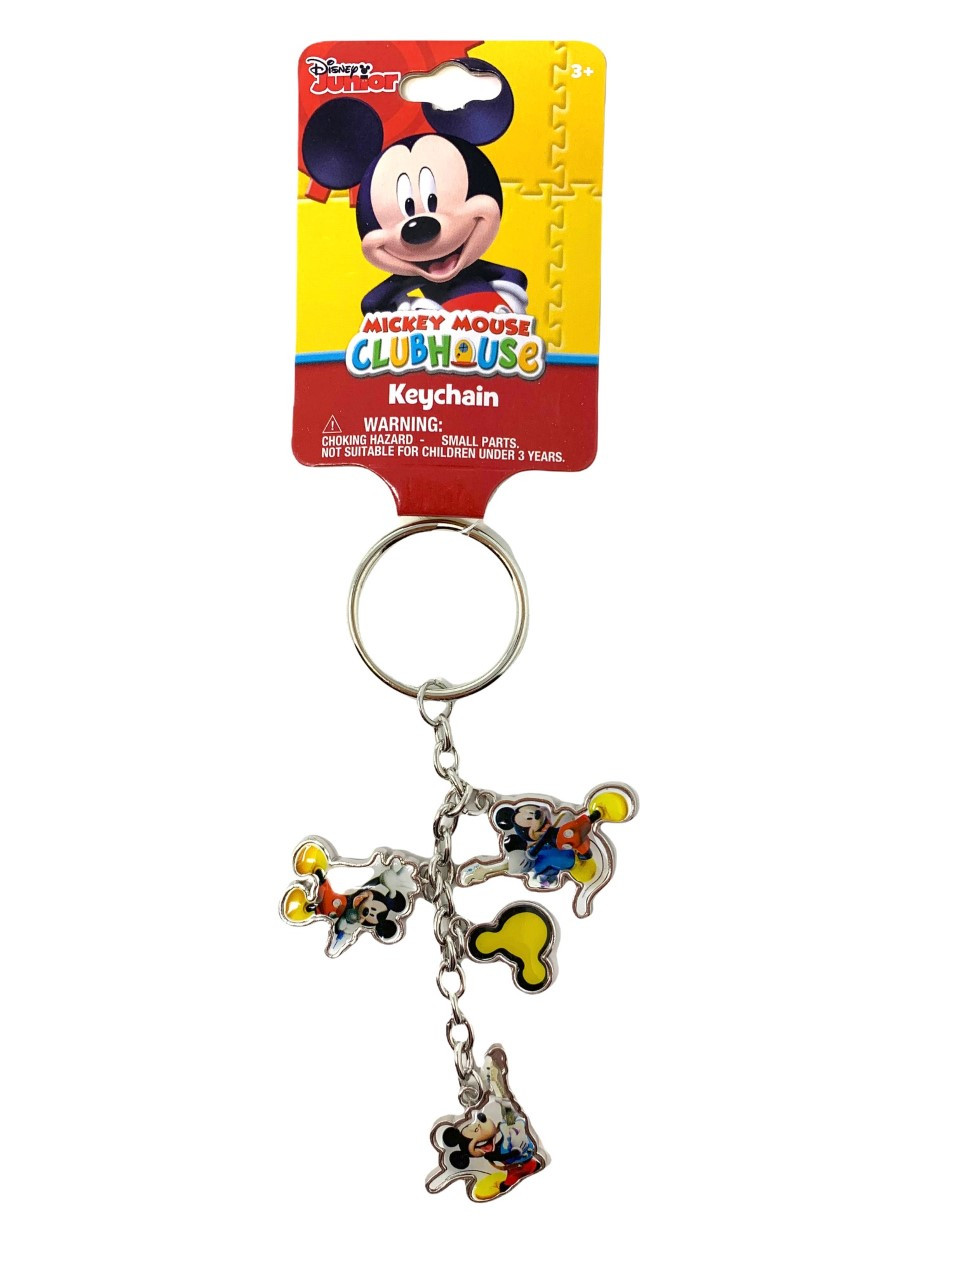 Disney Junior Minnie Mouse Clubhouse Metal Keychain - MINNIE MOUSE 